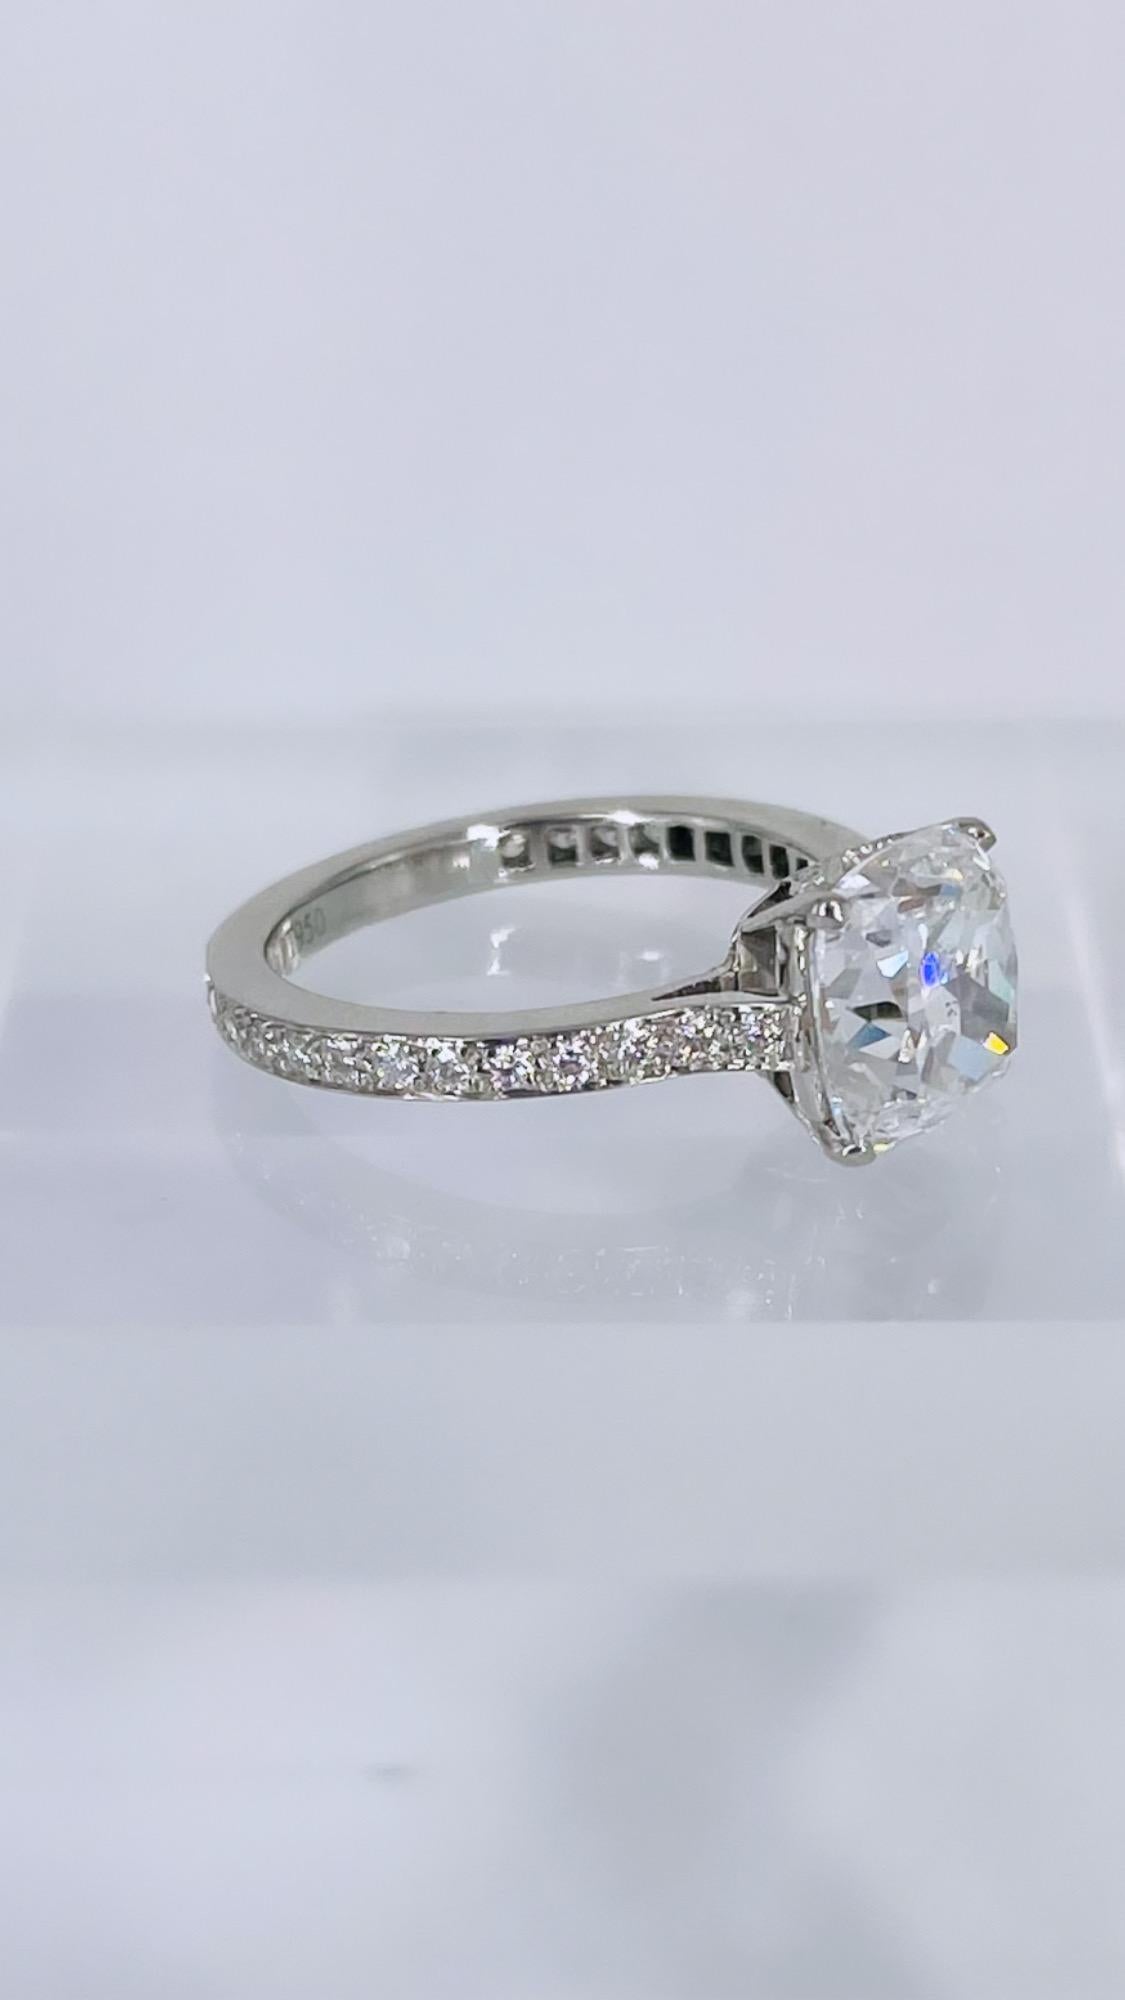 This engagement ring by J. Birnbach is a luxurious piece inspired by antique craftsmanship and details. The center diamond is a 2.68 carat brilliant cut cushion, certified by GIA to be E color and SI1 clarity. The larger facets give the diamond an